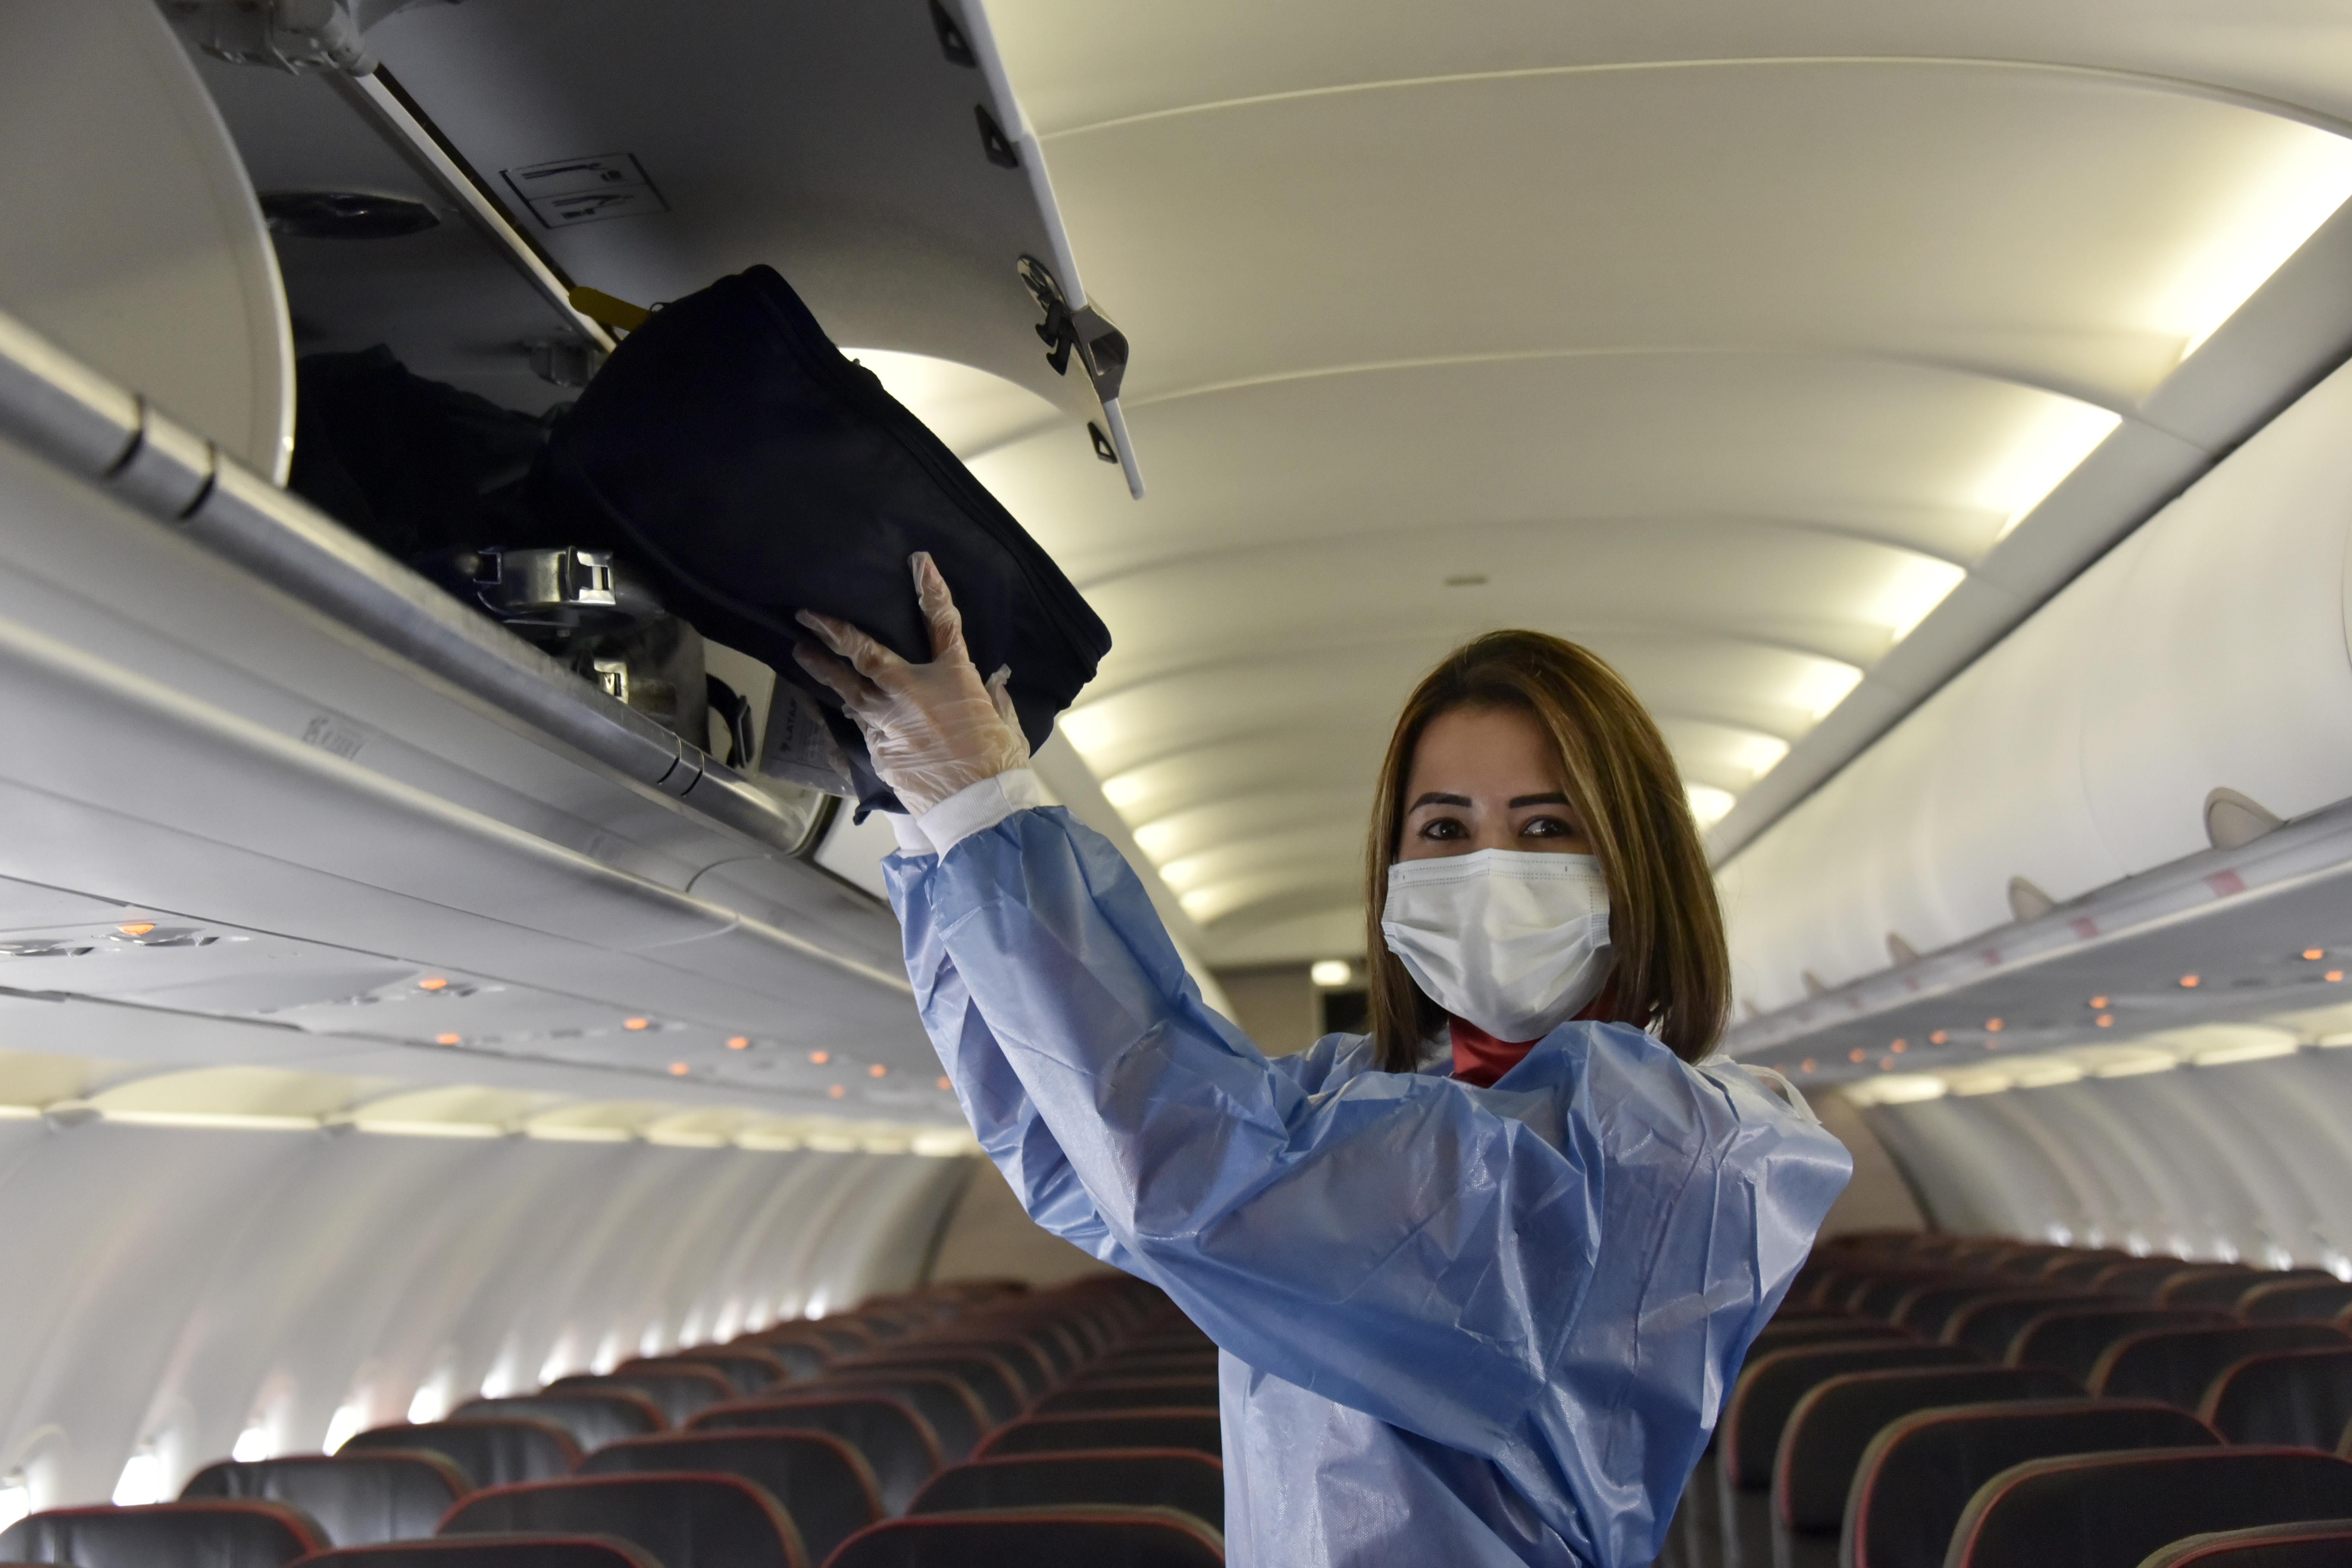 A woman wearing protective equipment, including a mask, stands in the aisle of an empty plane as she puts a bag into an overhead compartment.